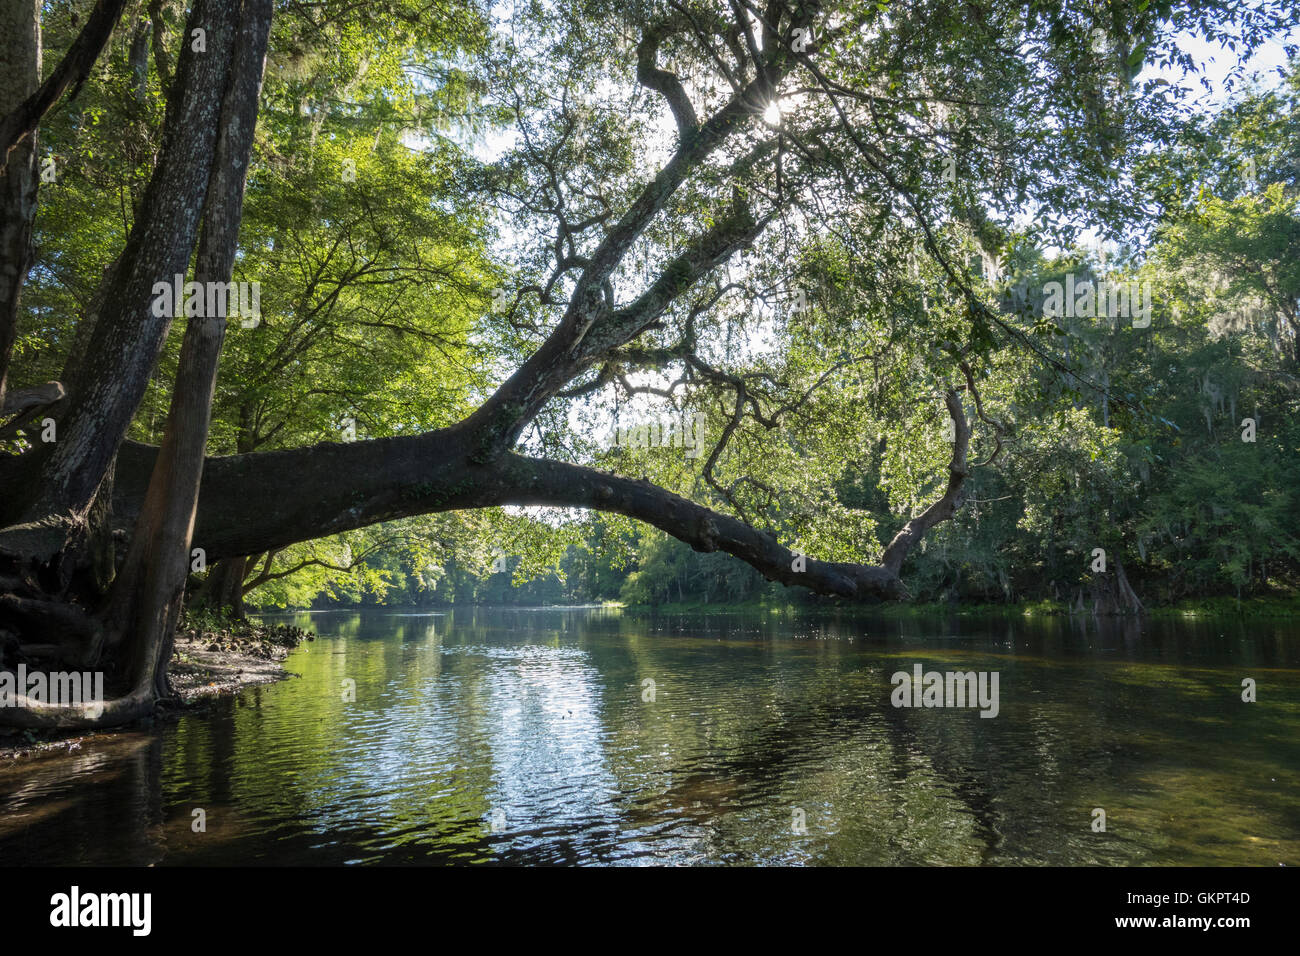 Oak tree overhanging the Santa Fe river at Poe Springs, Gilchrist County, Florida Stock Photo